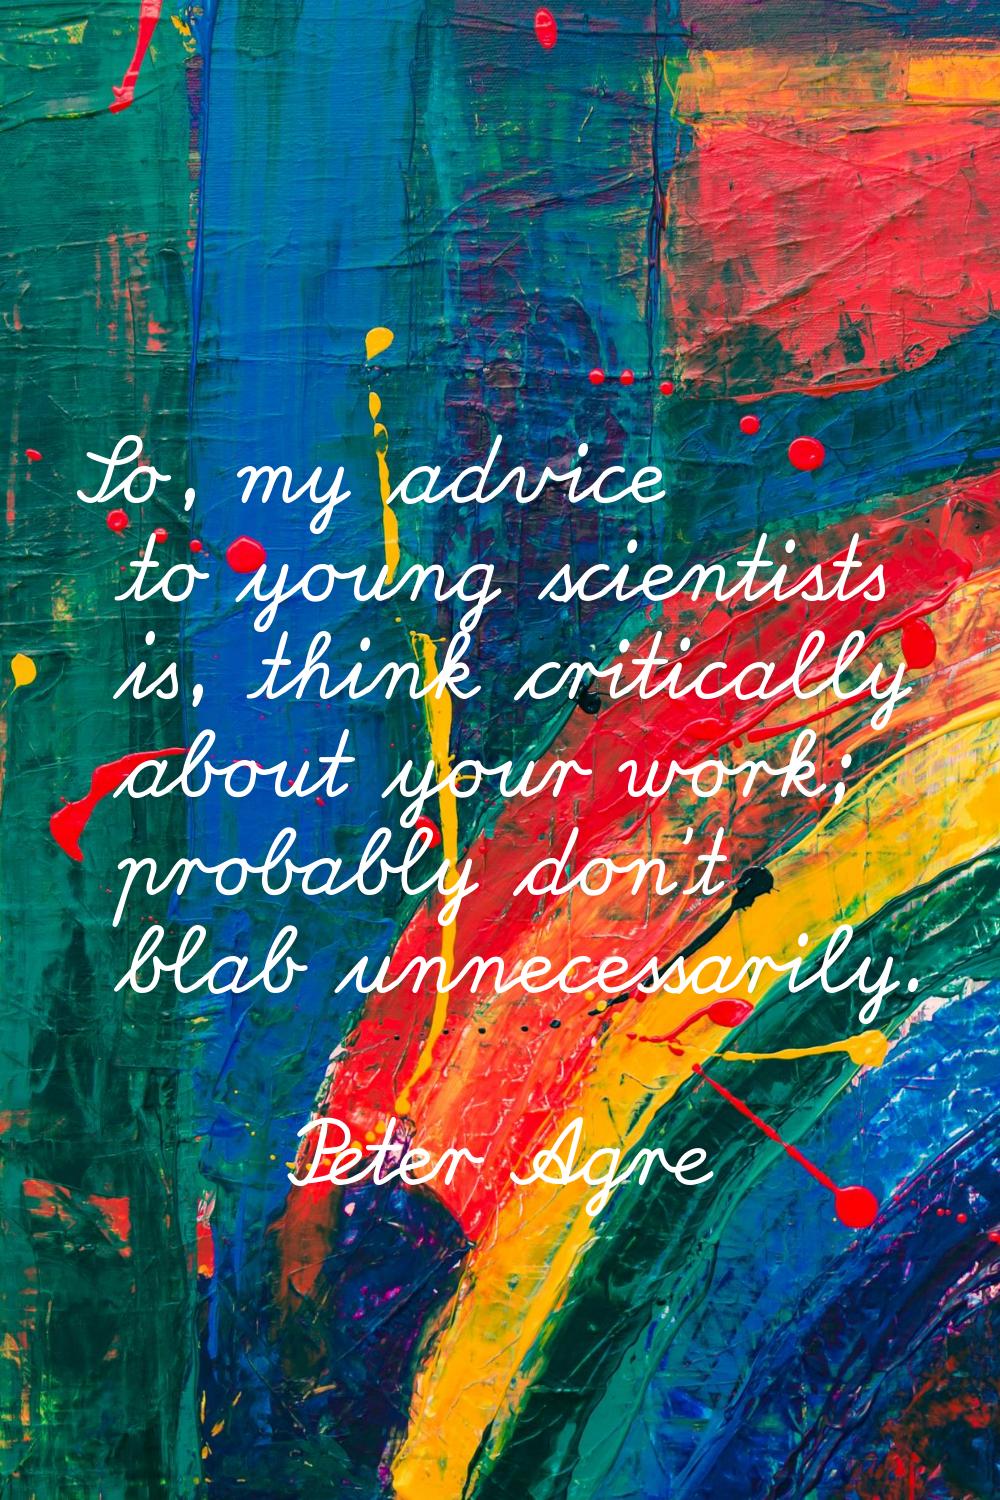 So, my advice to young scientists is, think critically about your work; probably don't blab unneces